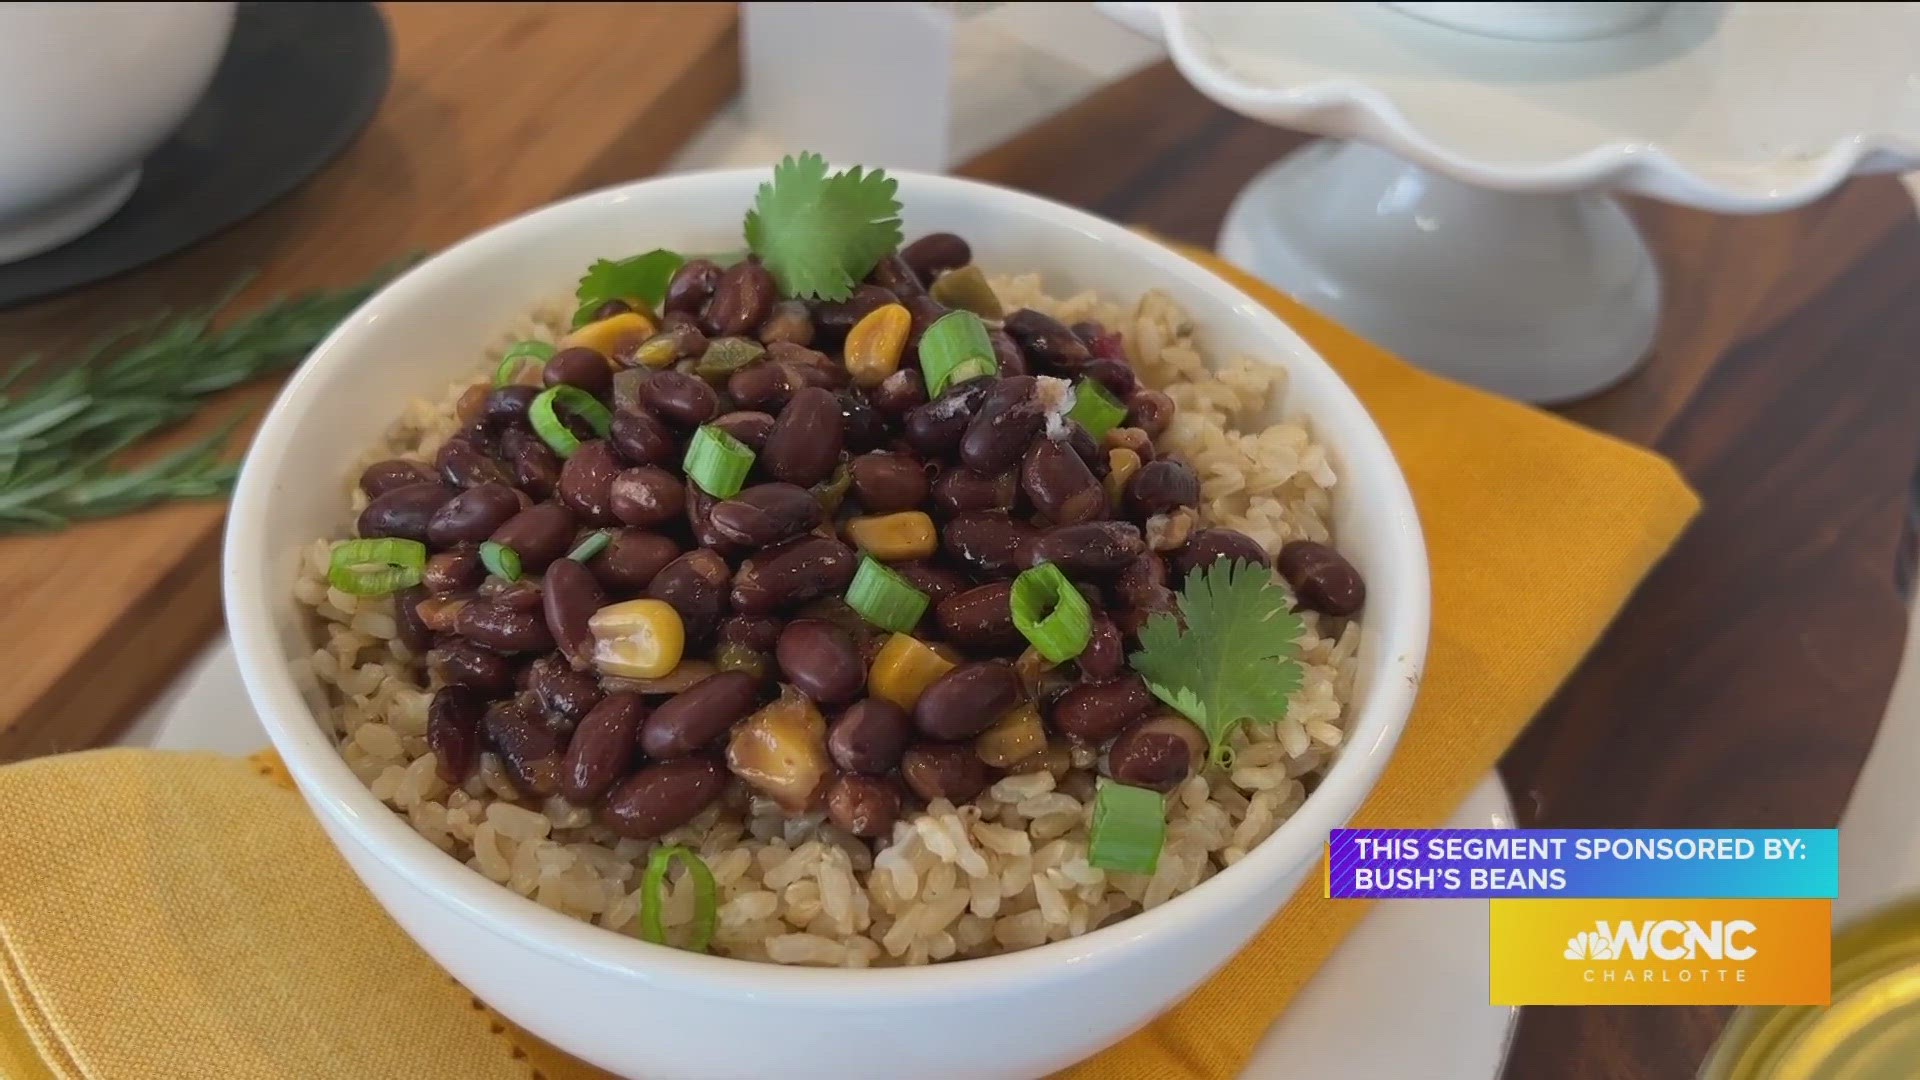 Registered dietitian discusses the health benefits of beans